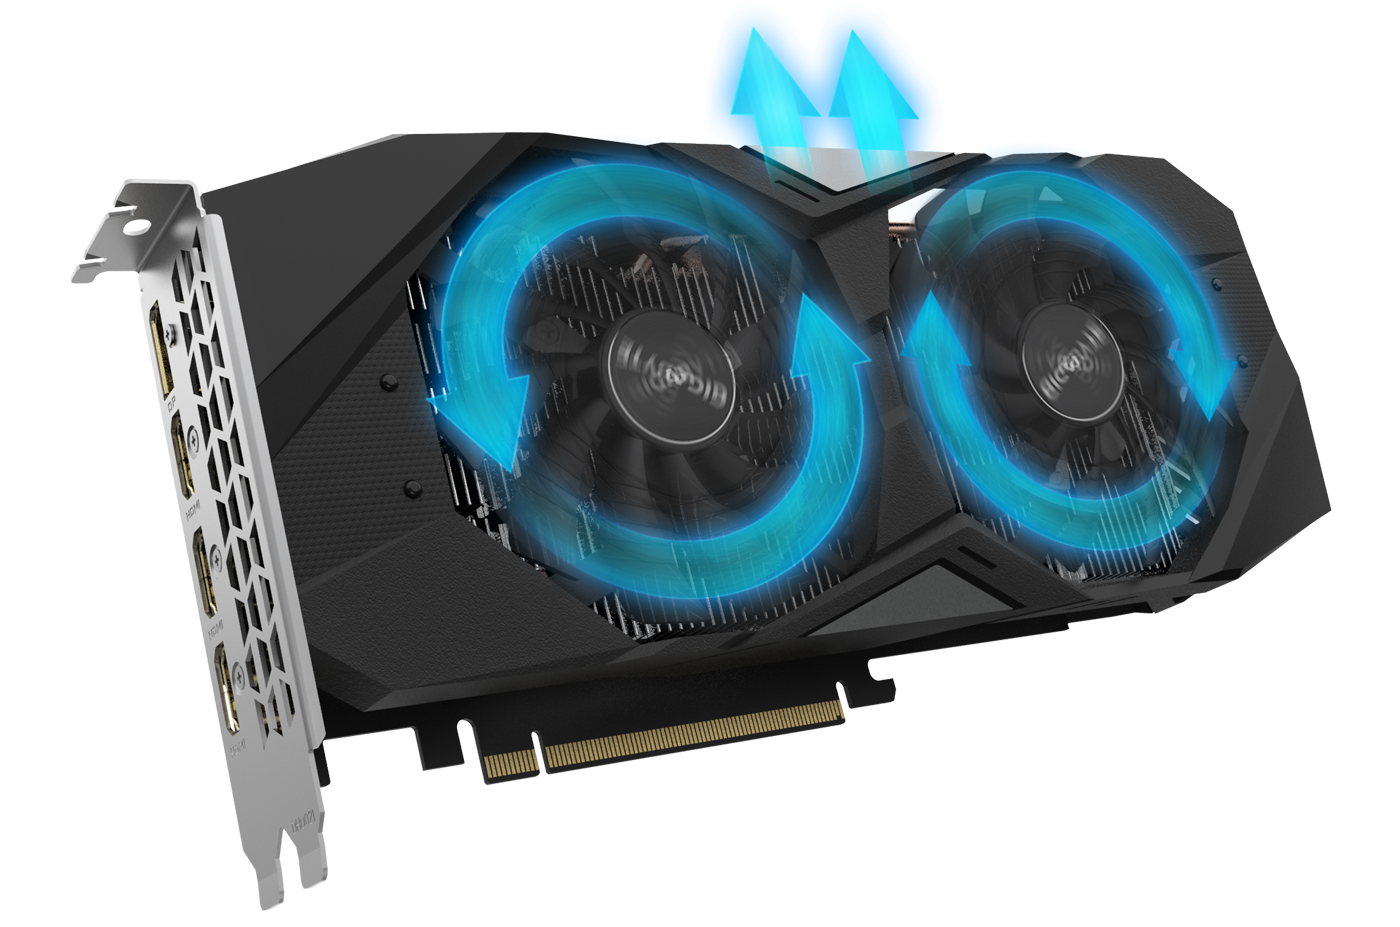 GIGABYTE GV-N208TWF3OC-11GC graphics card angled up to the right with blue graphics showing the airflow its spinning fans create